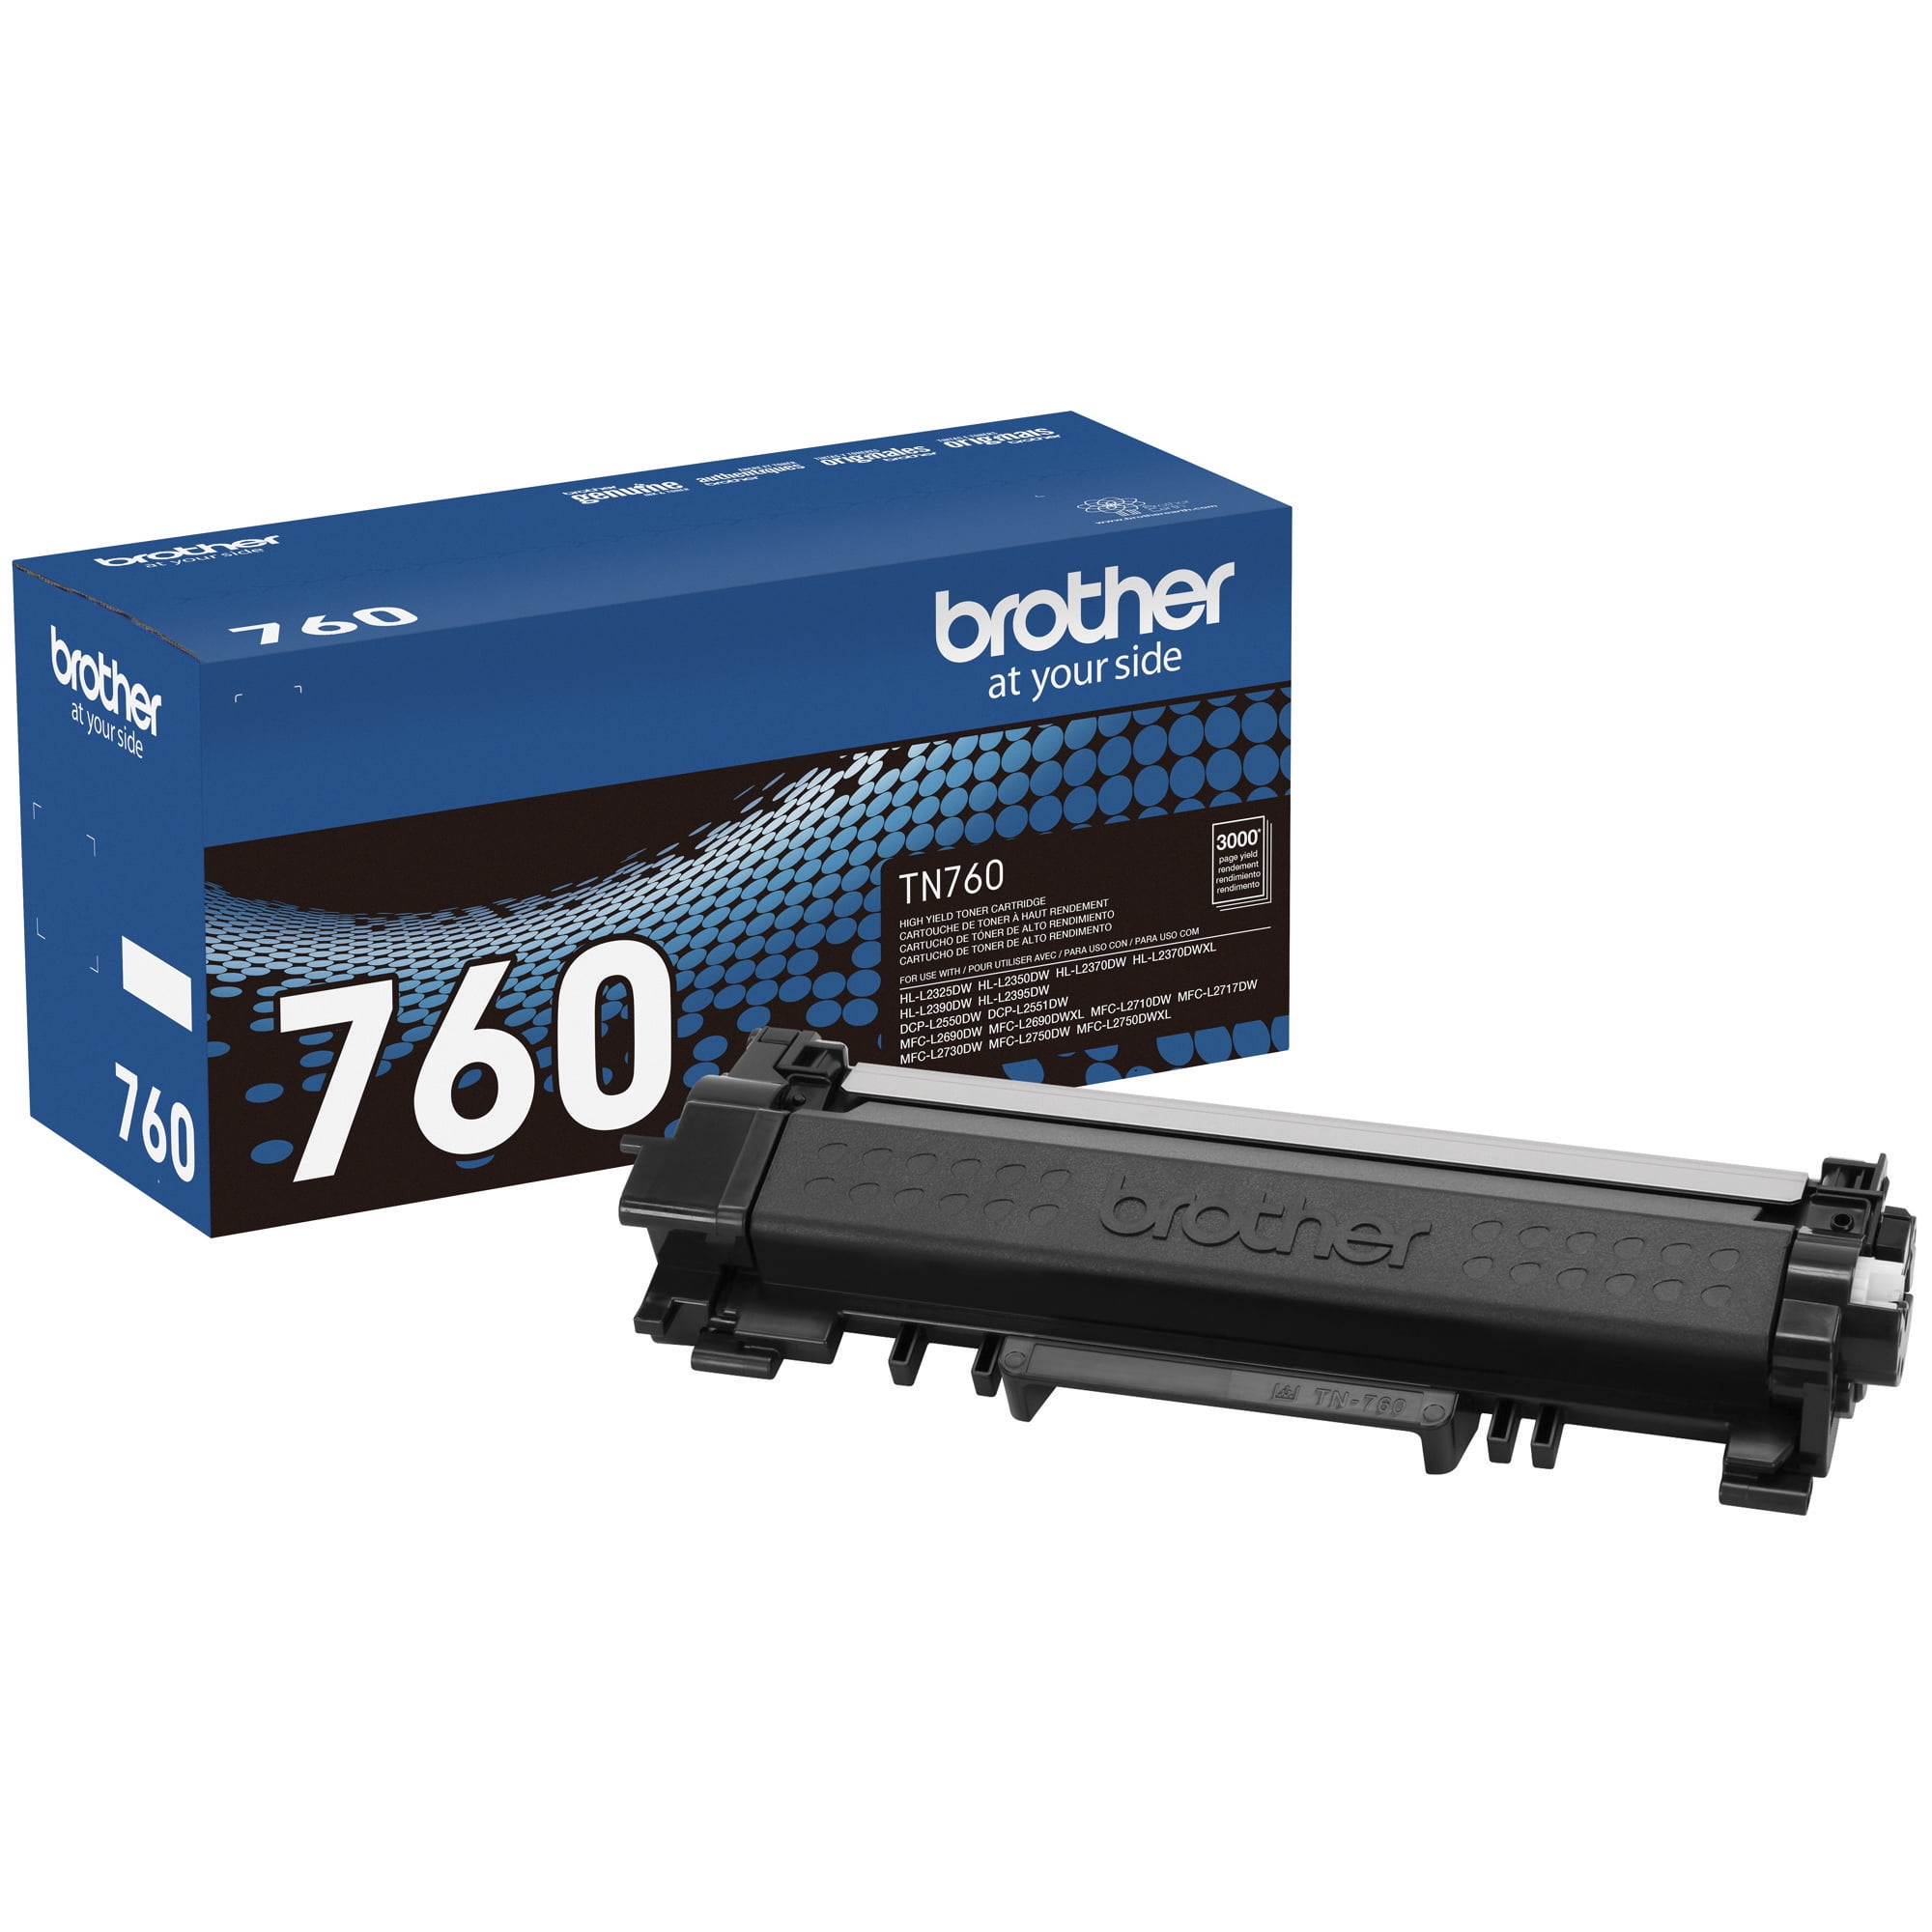 Brother Genuine High Yield Toner Cartridge, TN760, Page Yield Up to 3,000 Pages